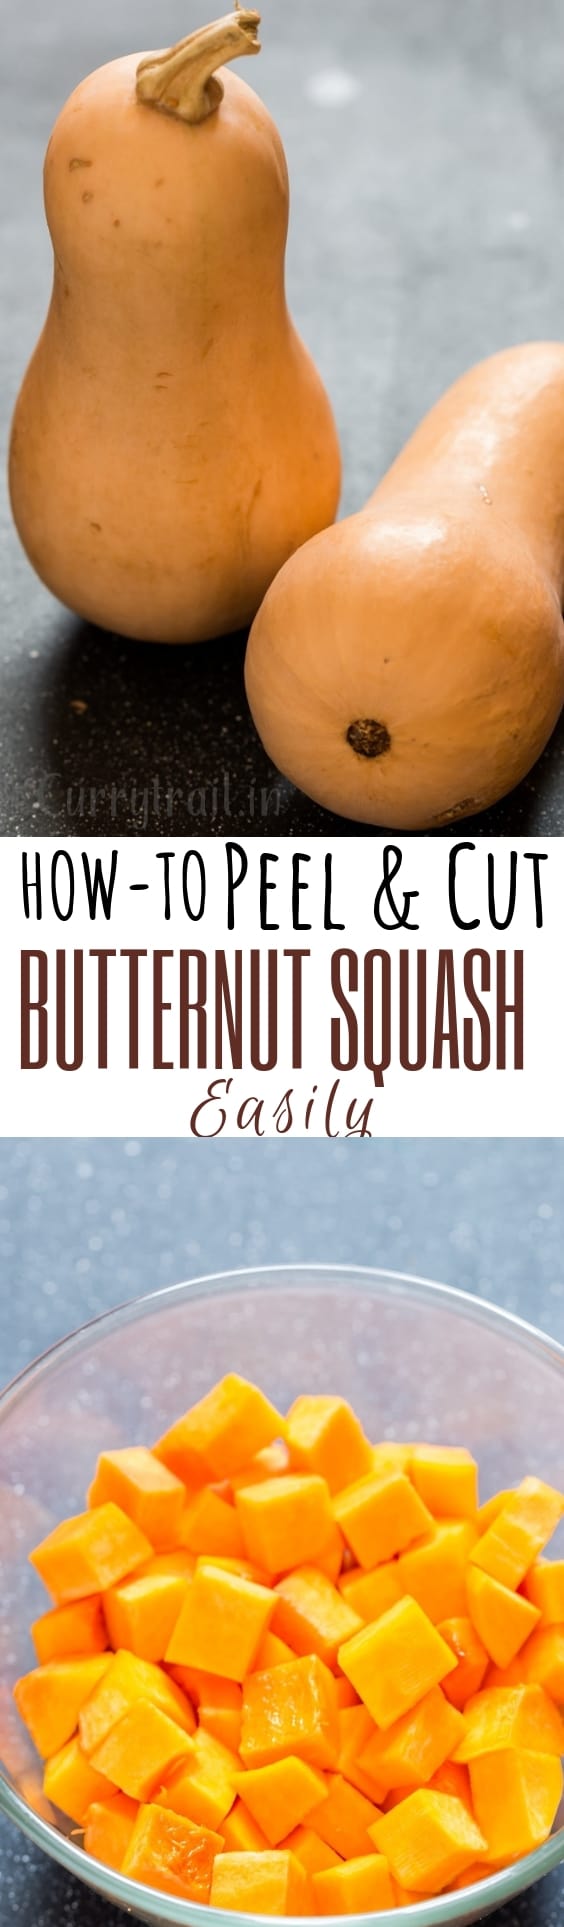 a complete guide on how to peel and cut butternut squash with text overlay